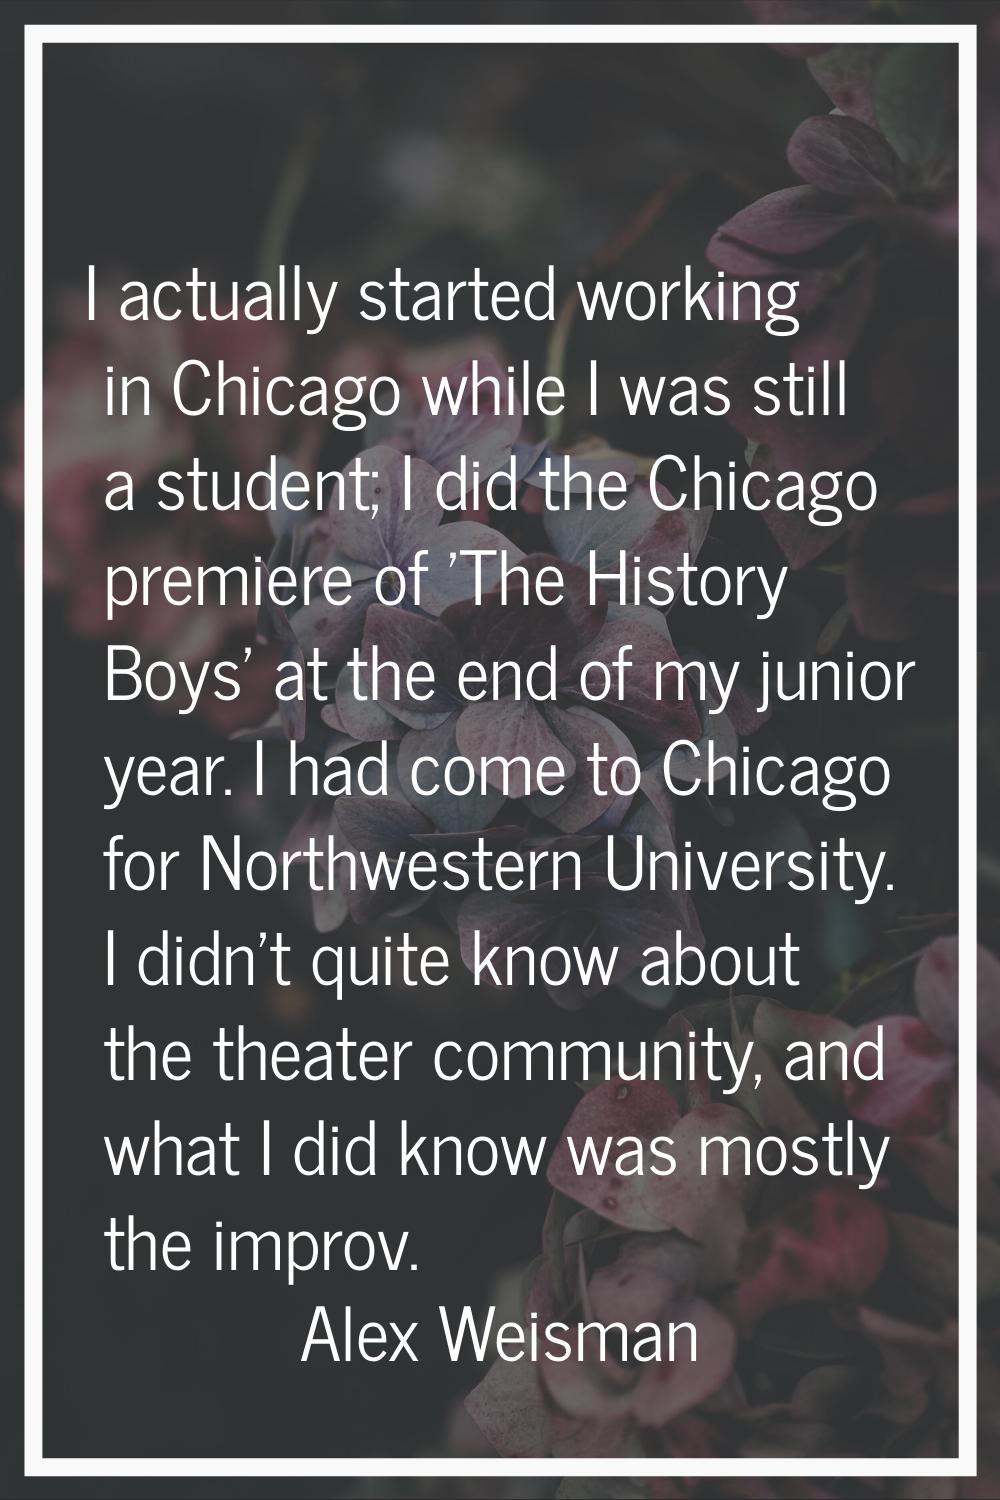 I actually started working in Chicago while I was still a student; I did the Chicago premiere of 'T